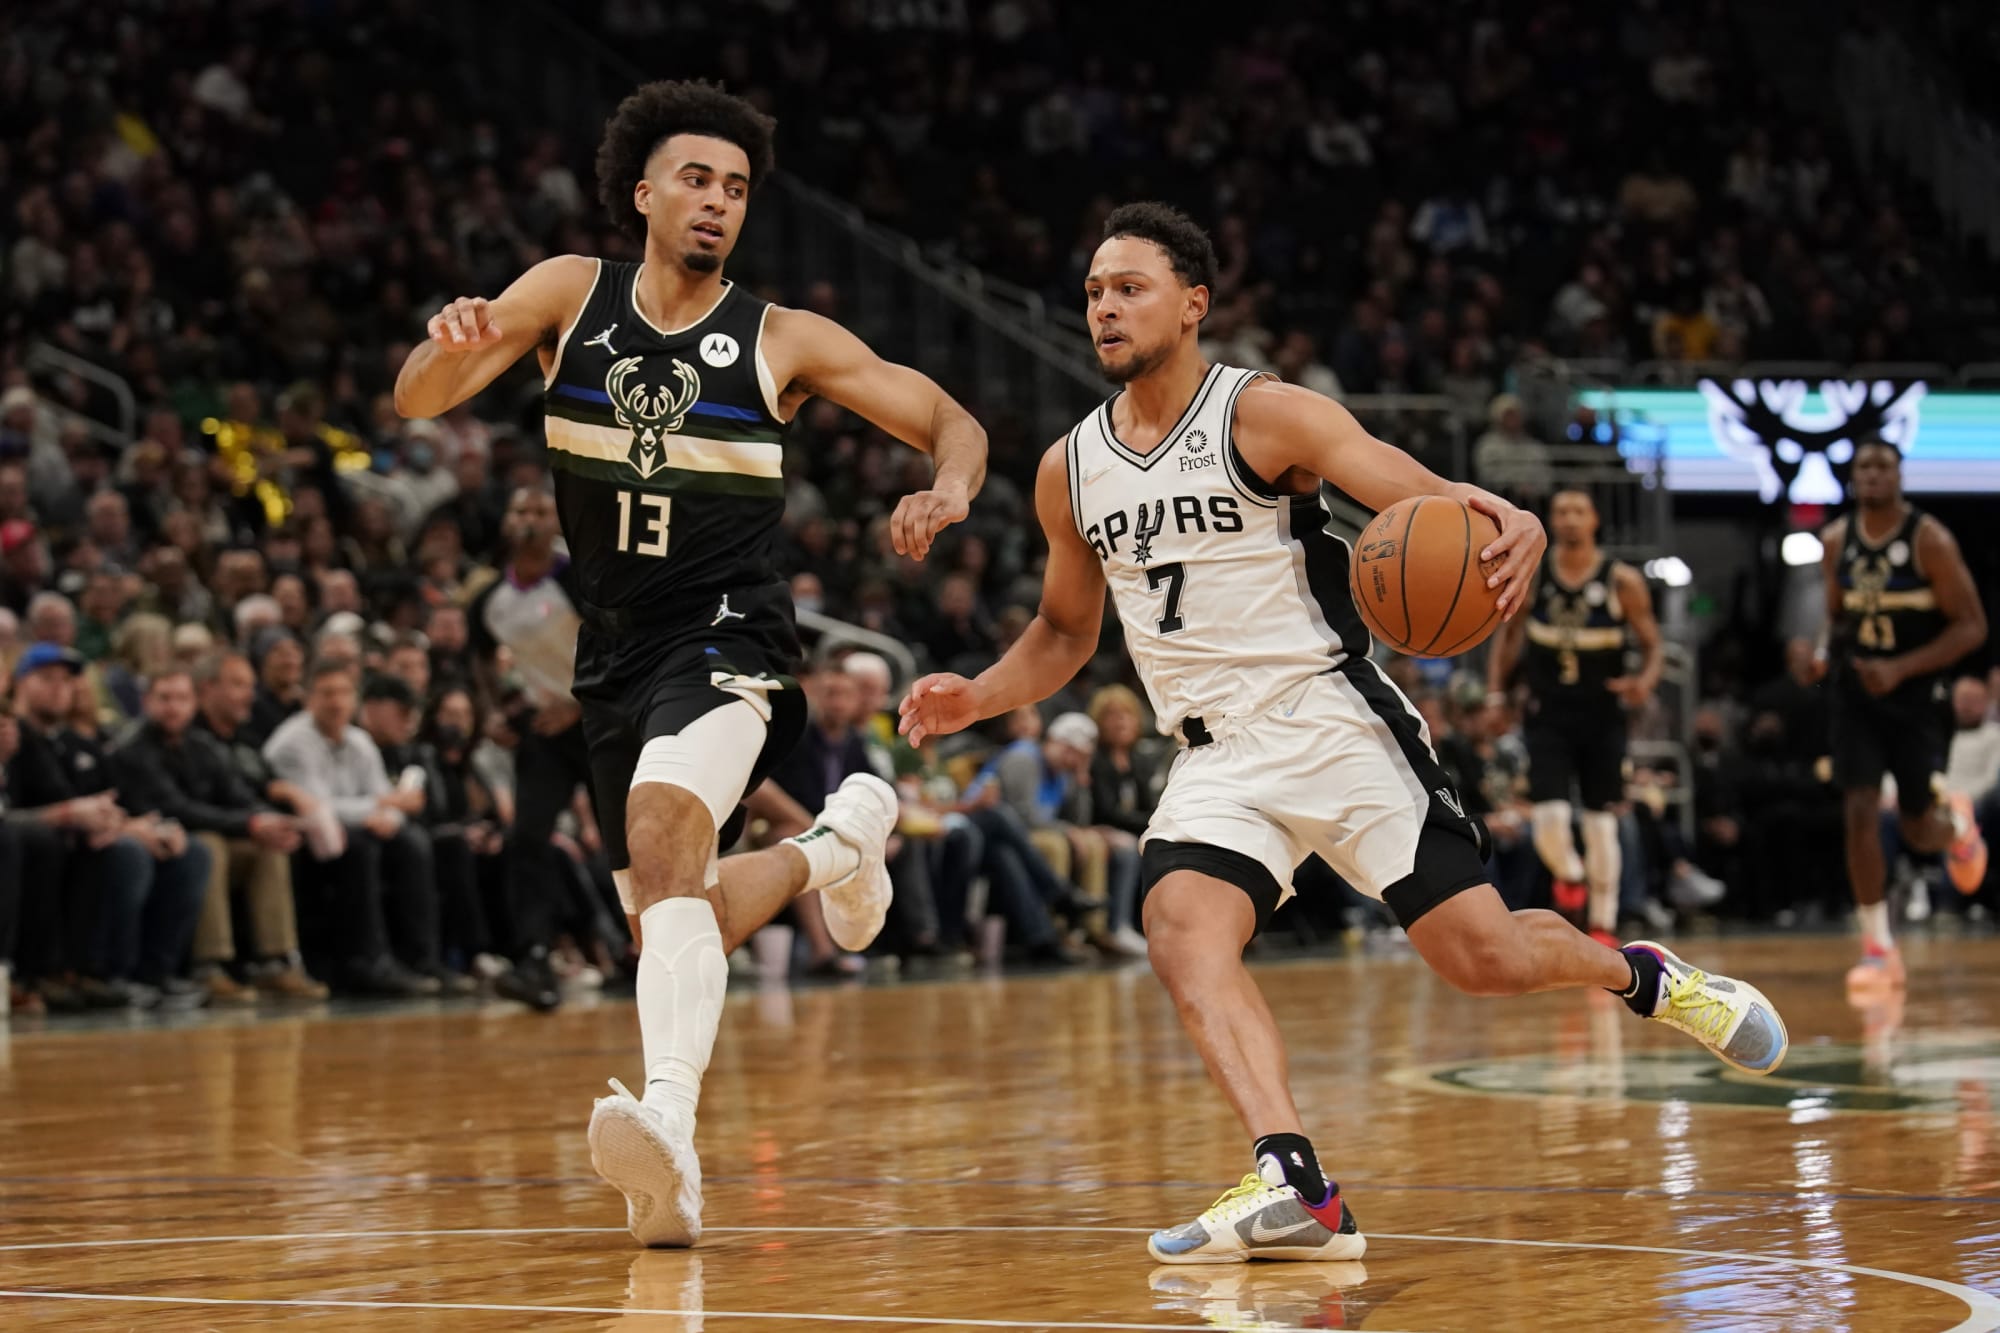 Bryn Forbes 2016-17 season review: A surprise signing who never stopped  shooting - Pounding The Rock